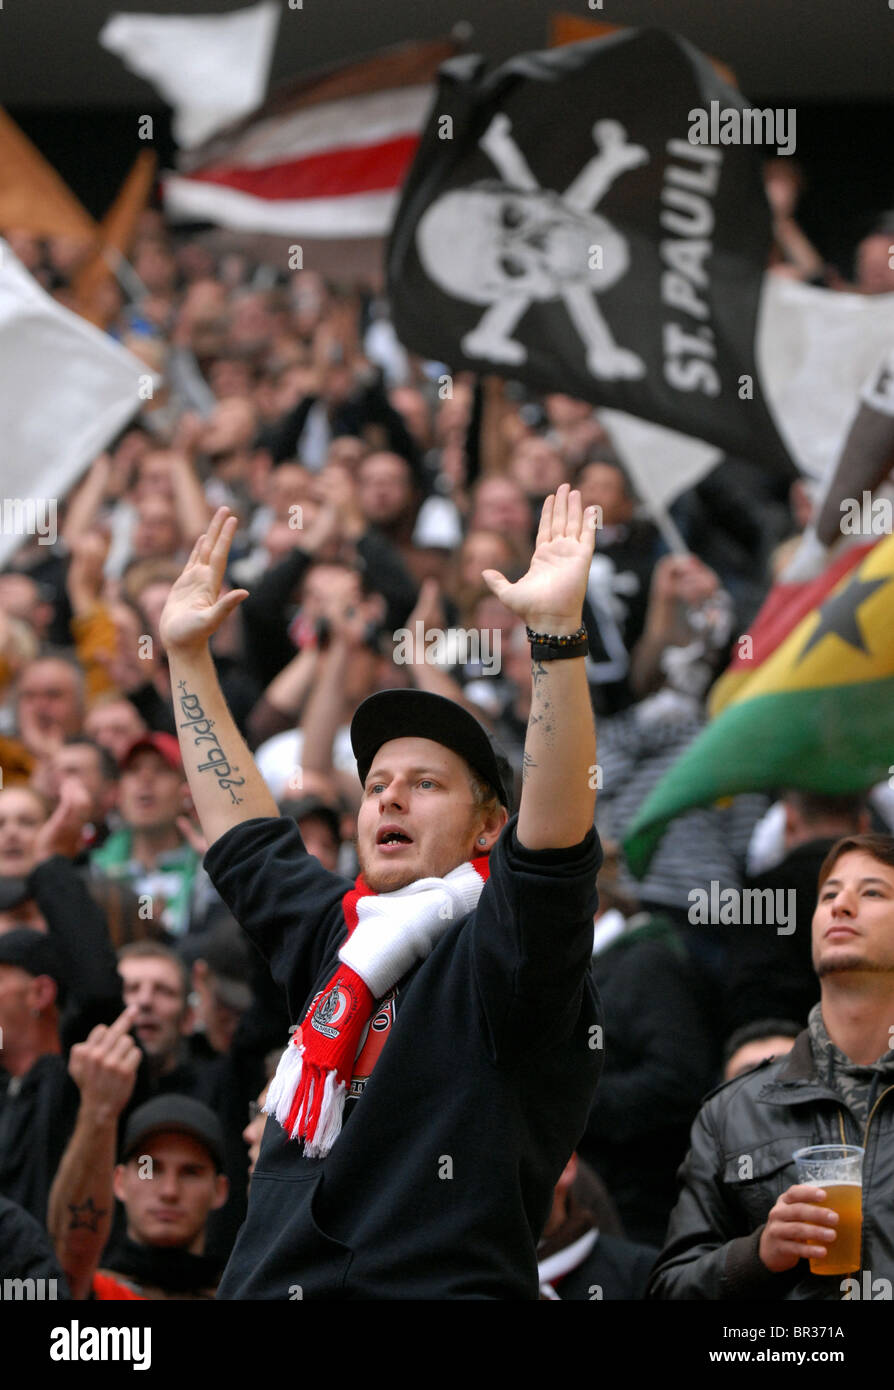 Fans, Supporters of FC St. Pauli Stock Photo - Alamy